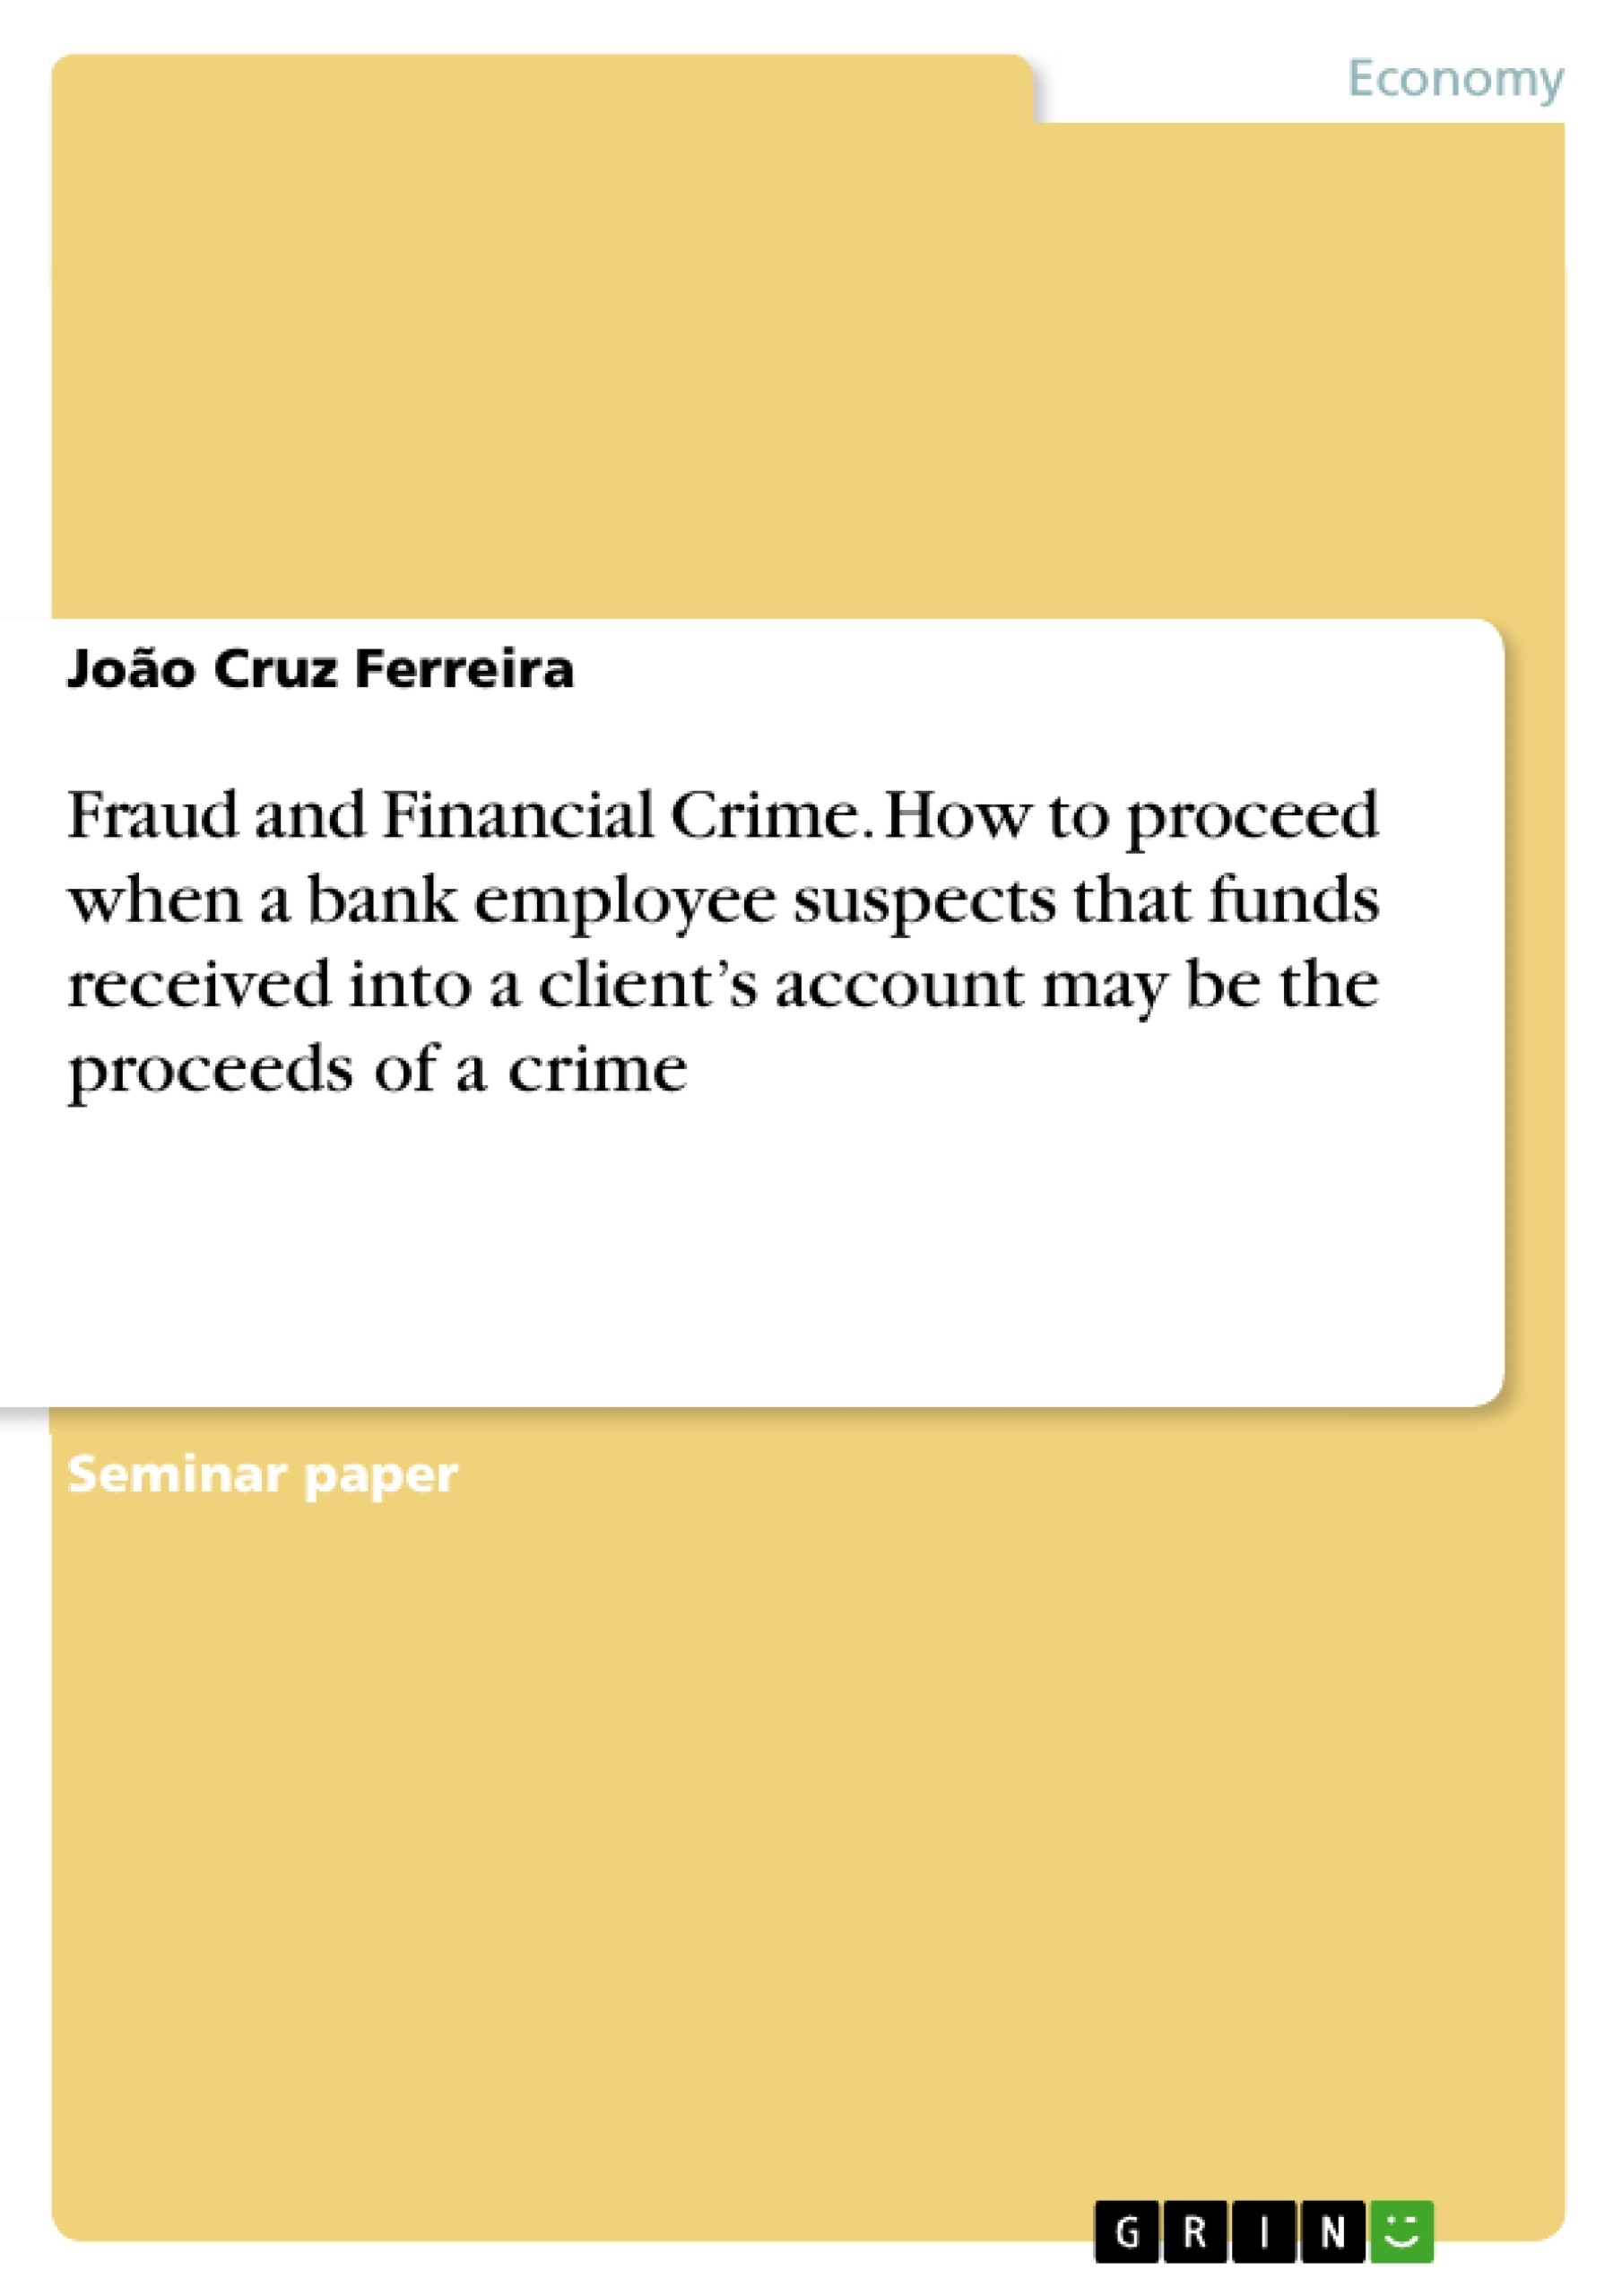 Título: Fraud and Financial Crime. How to proceed when a bank employee suspects that funds received into a client’s account may be the proceeds of a crime